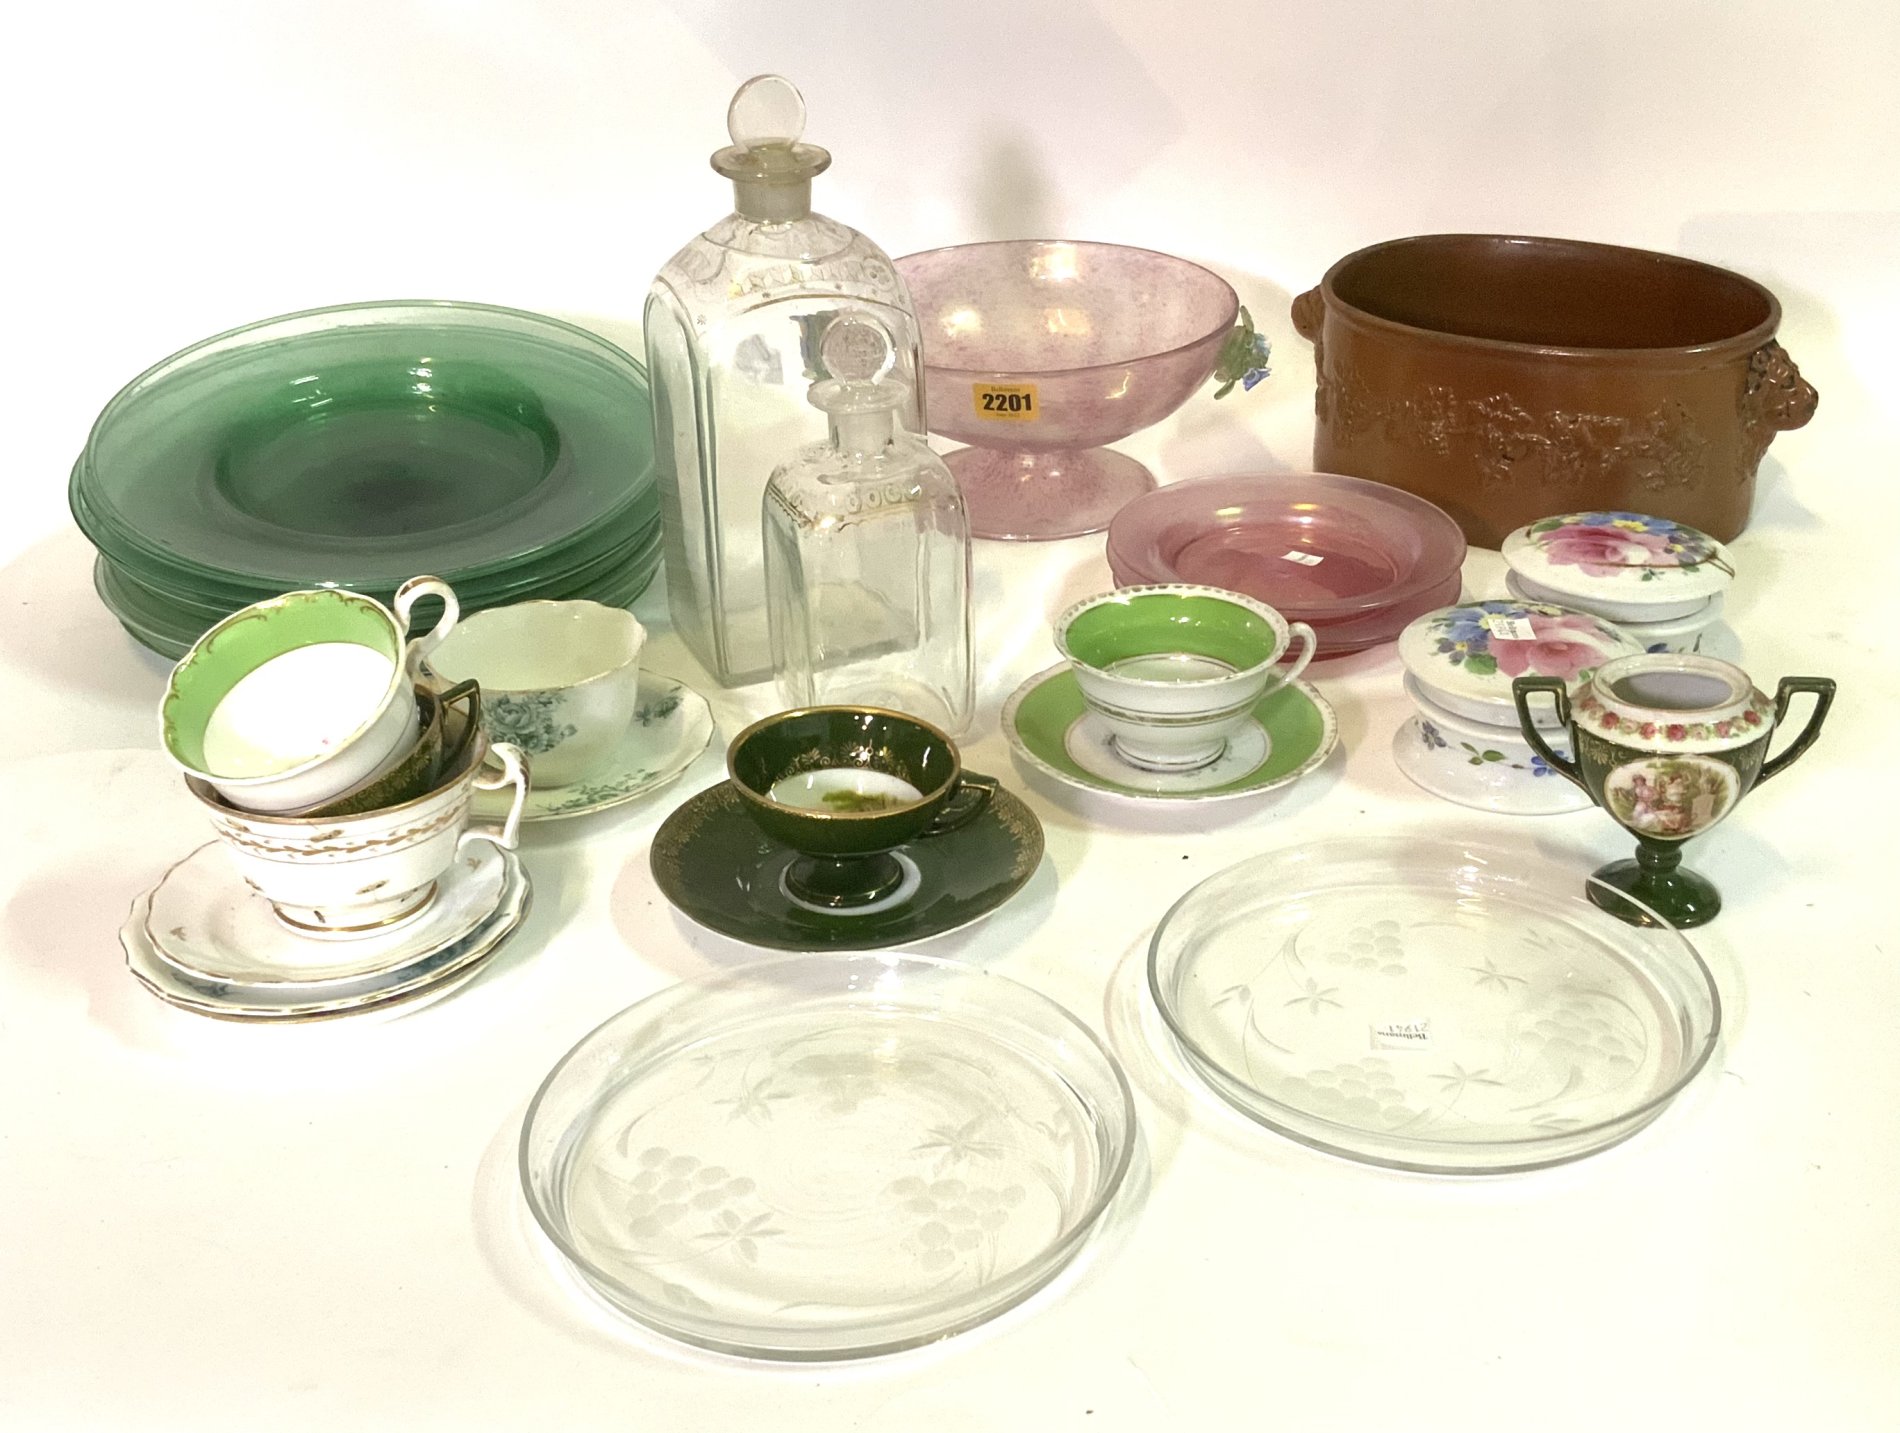 A QUANTITY OF MOSTLY 19TH CENTURY AND LATER ENGLISH CERAMICS, GLASS PLATES AND SUNDRY (QTY)